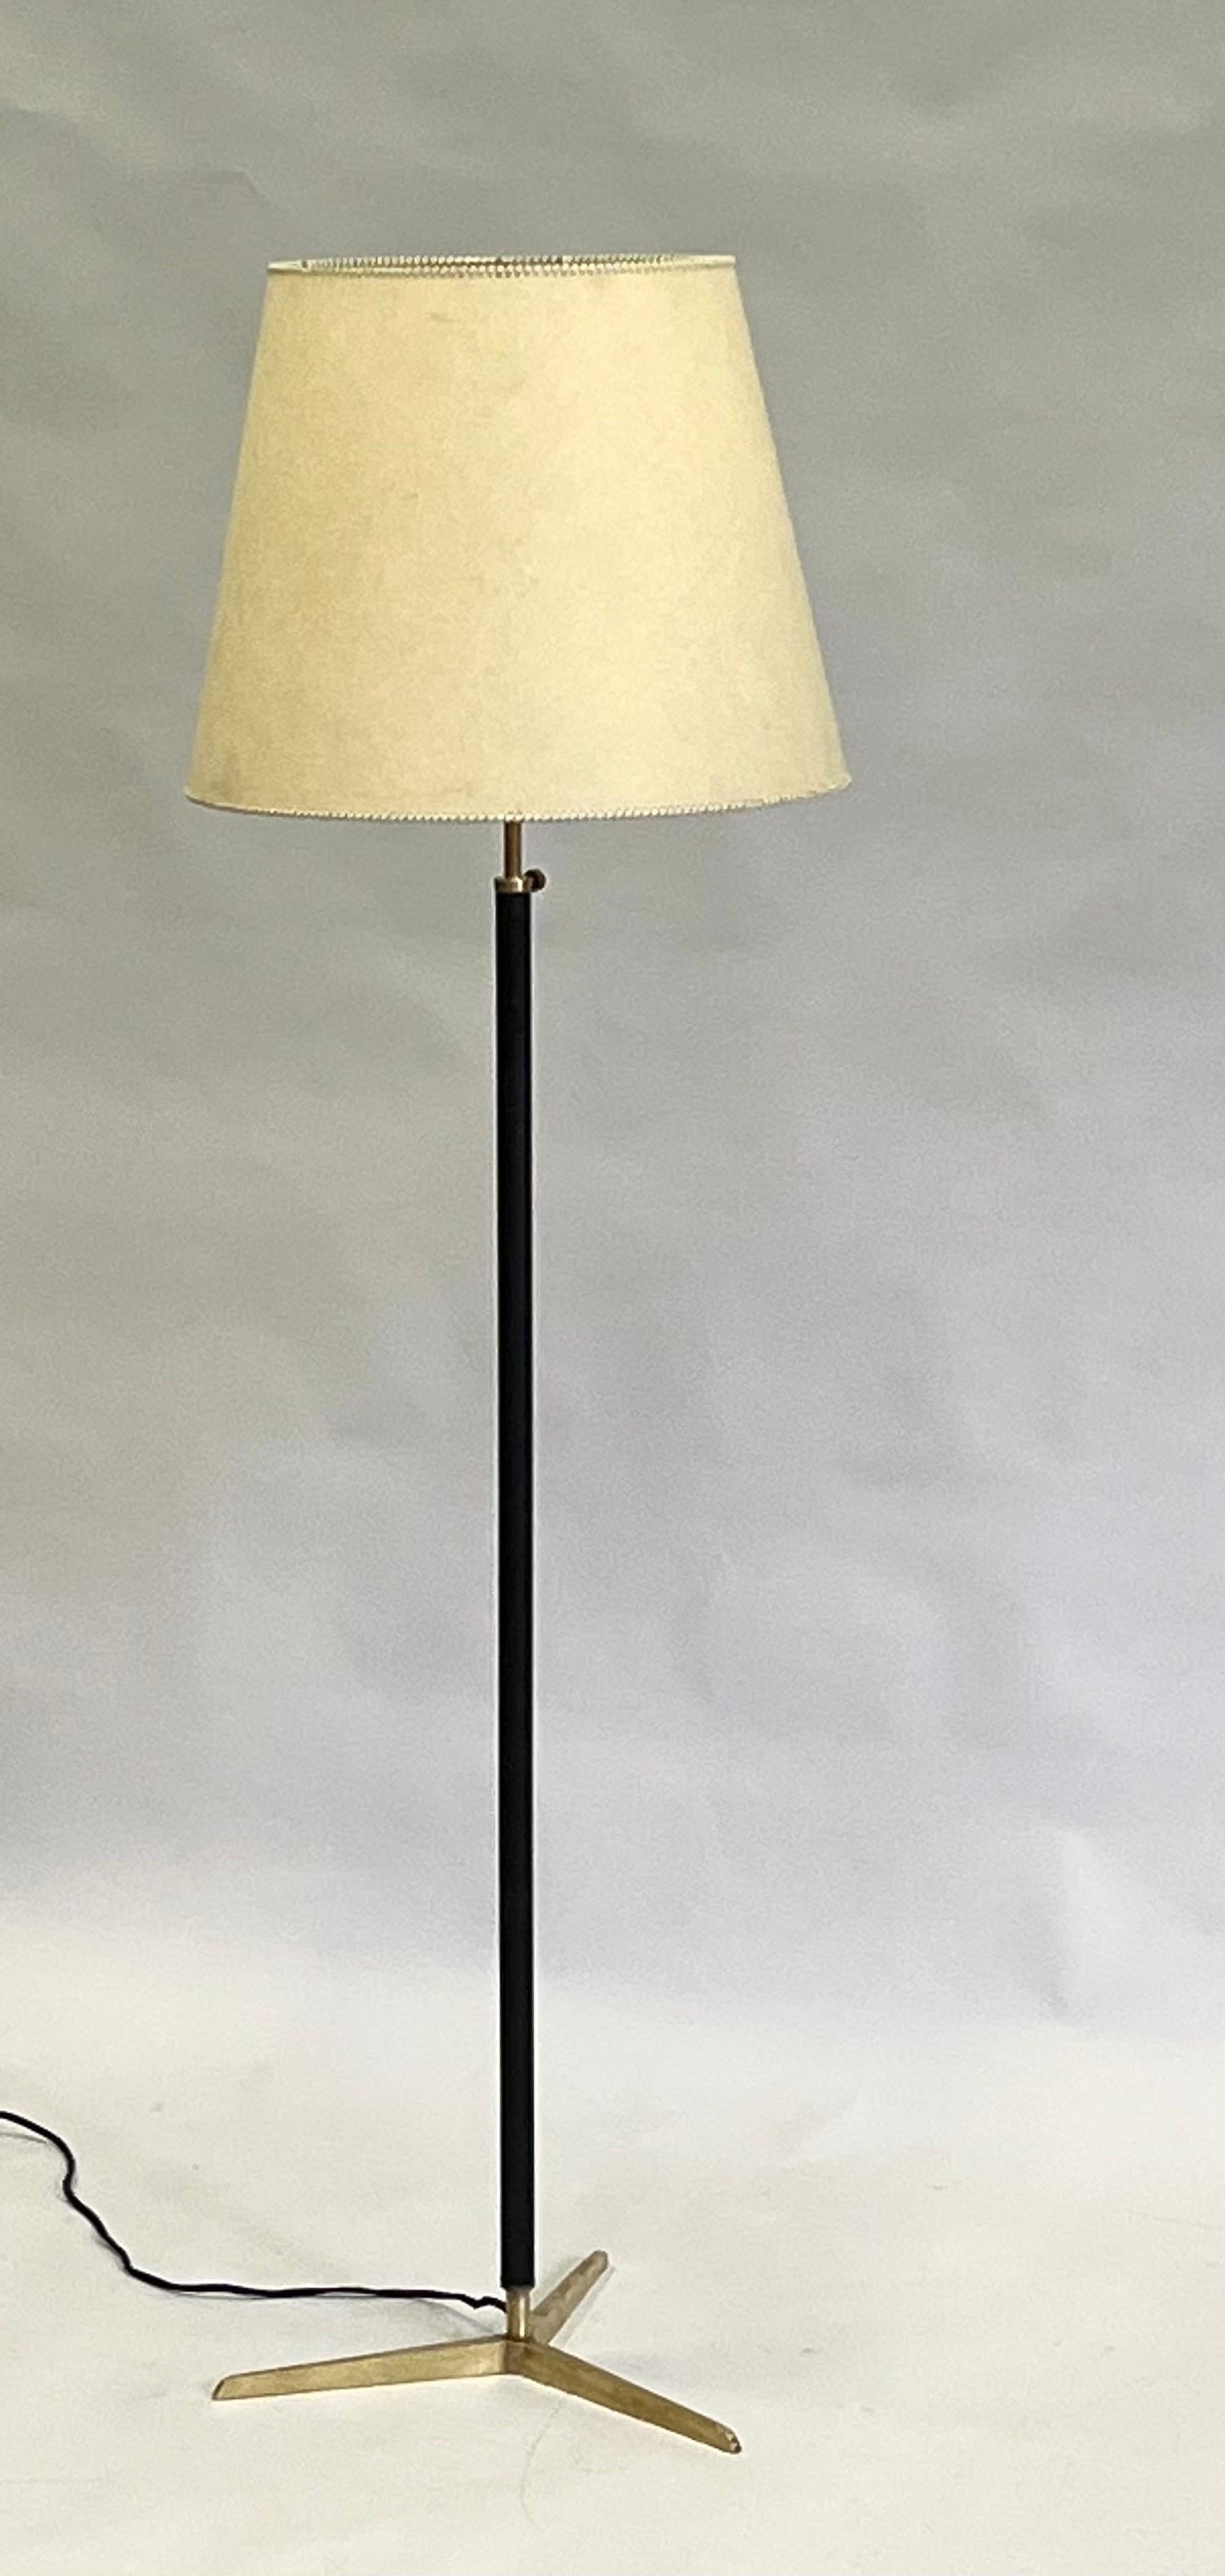 French Mid-Century Modern Hand Stitched Leather Floor Lamp Jacques Adnet In Good Condition For Sale In New York, NY